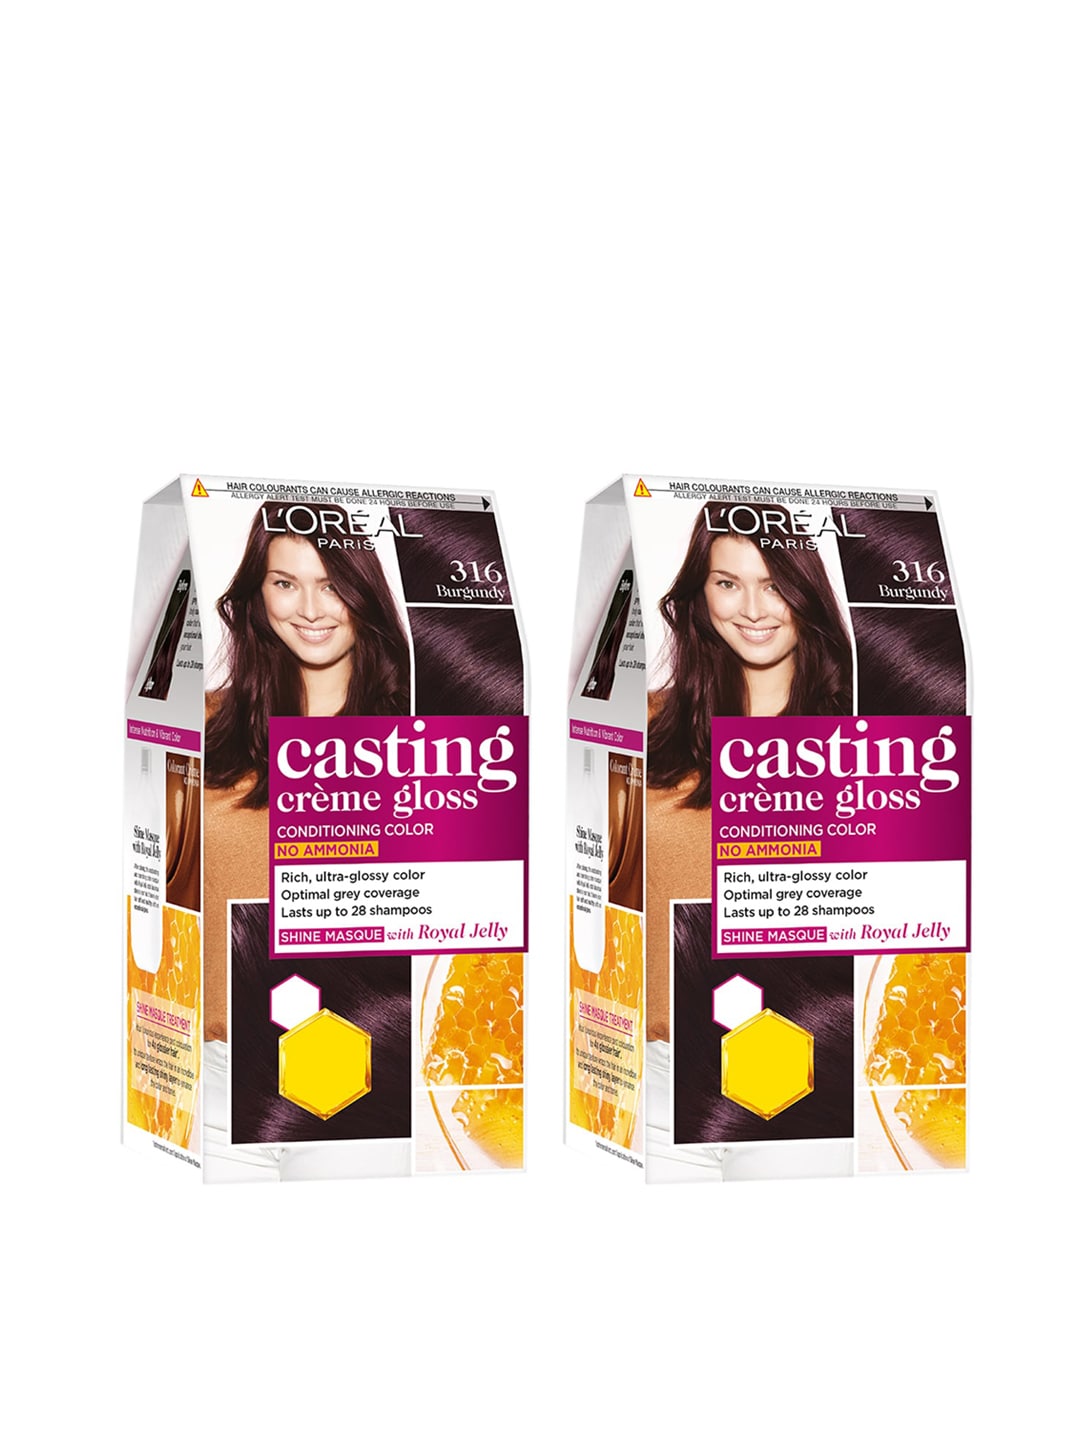 L'Oreal Paris Set of 2 Casting Creme Gloss Hair Color - Burgundy 316 Price in India